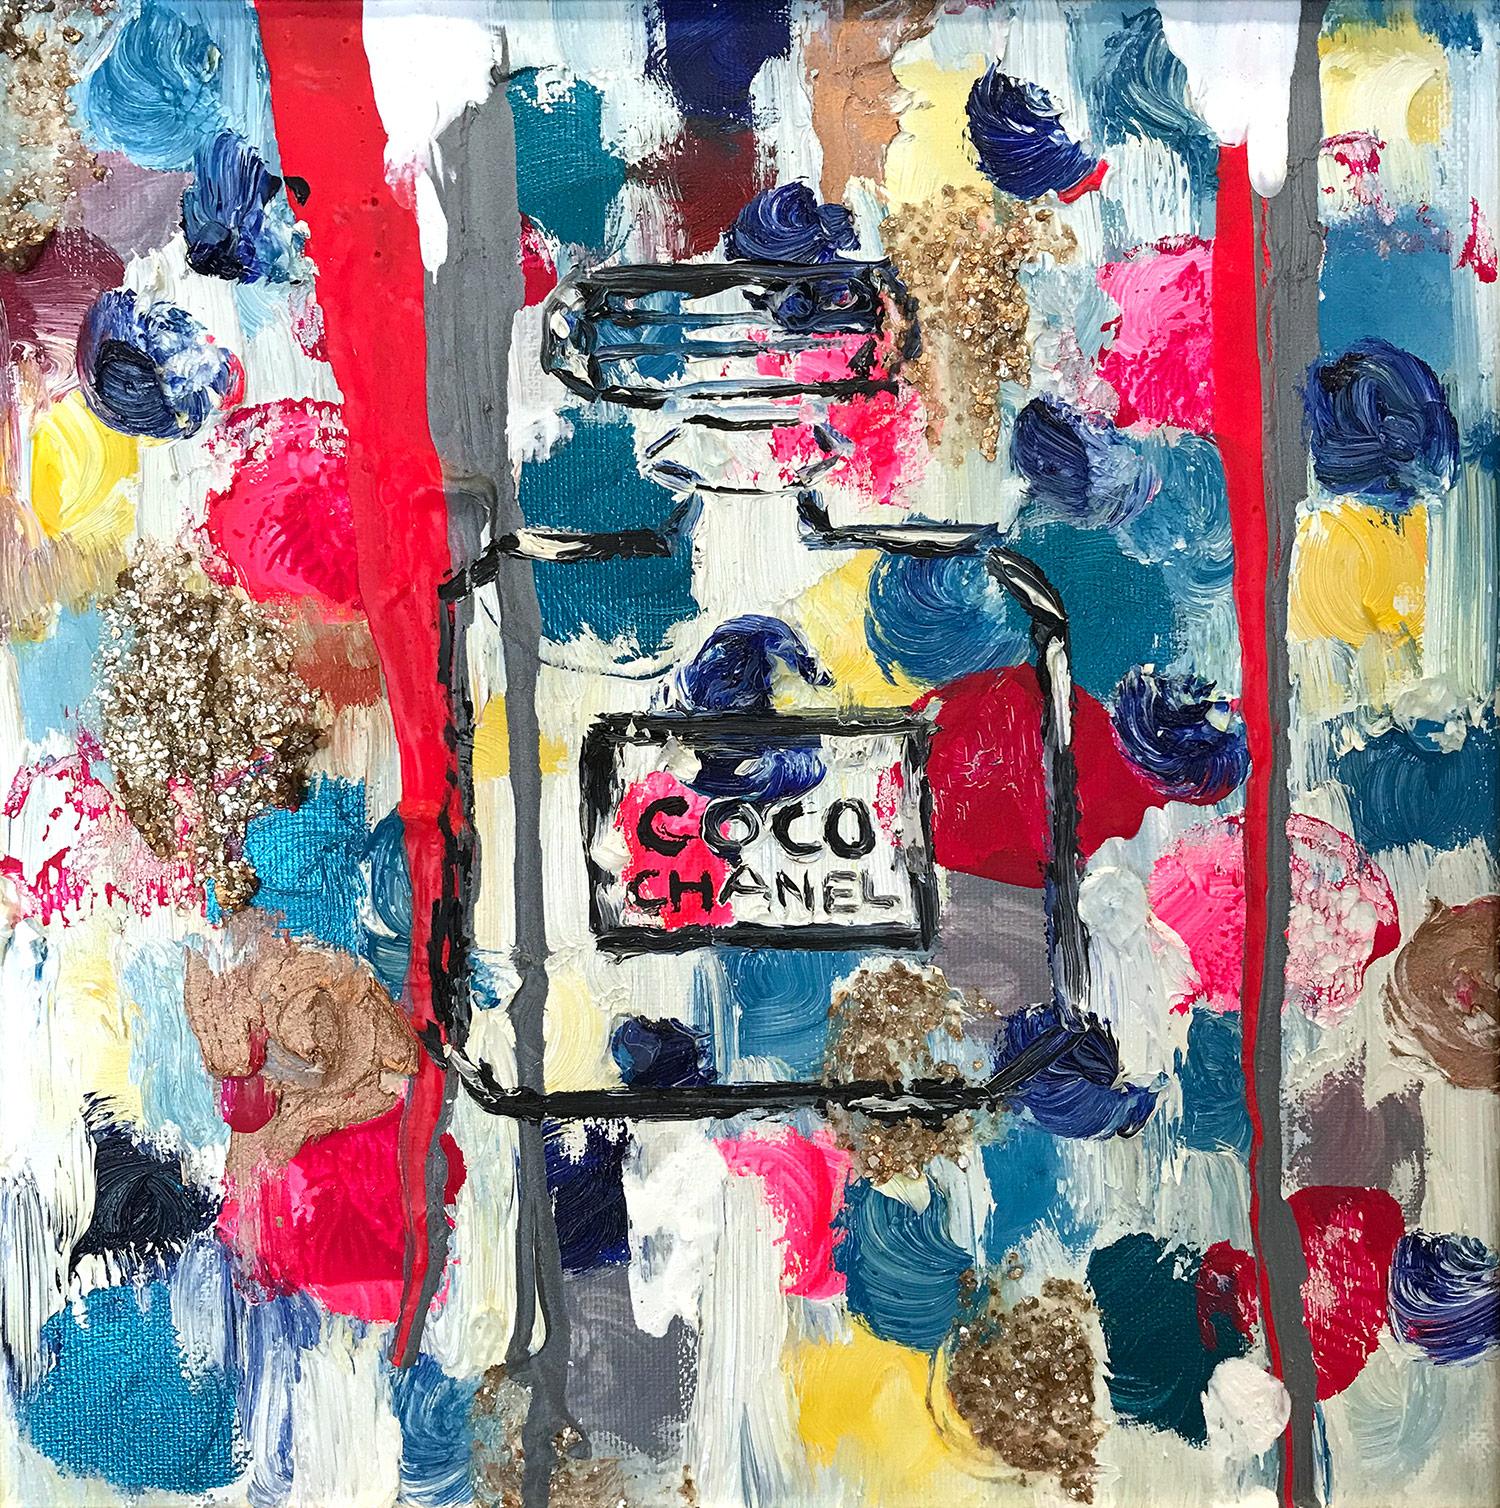 Dripping Dots, Coco Chanel Mornings – Painting von Cindy Shaoul